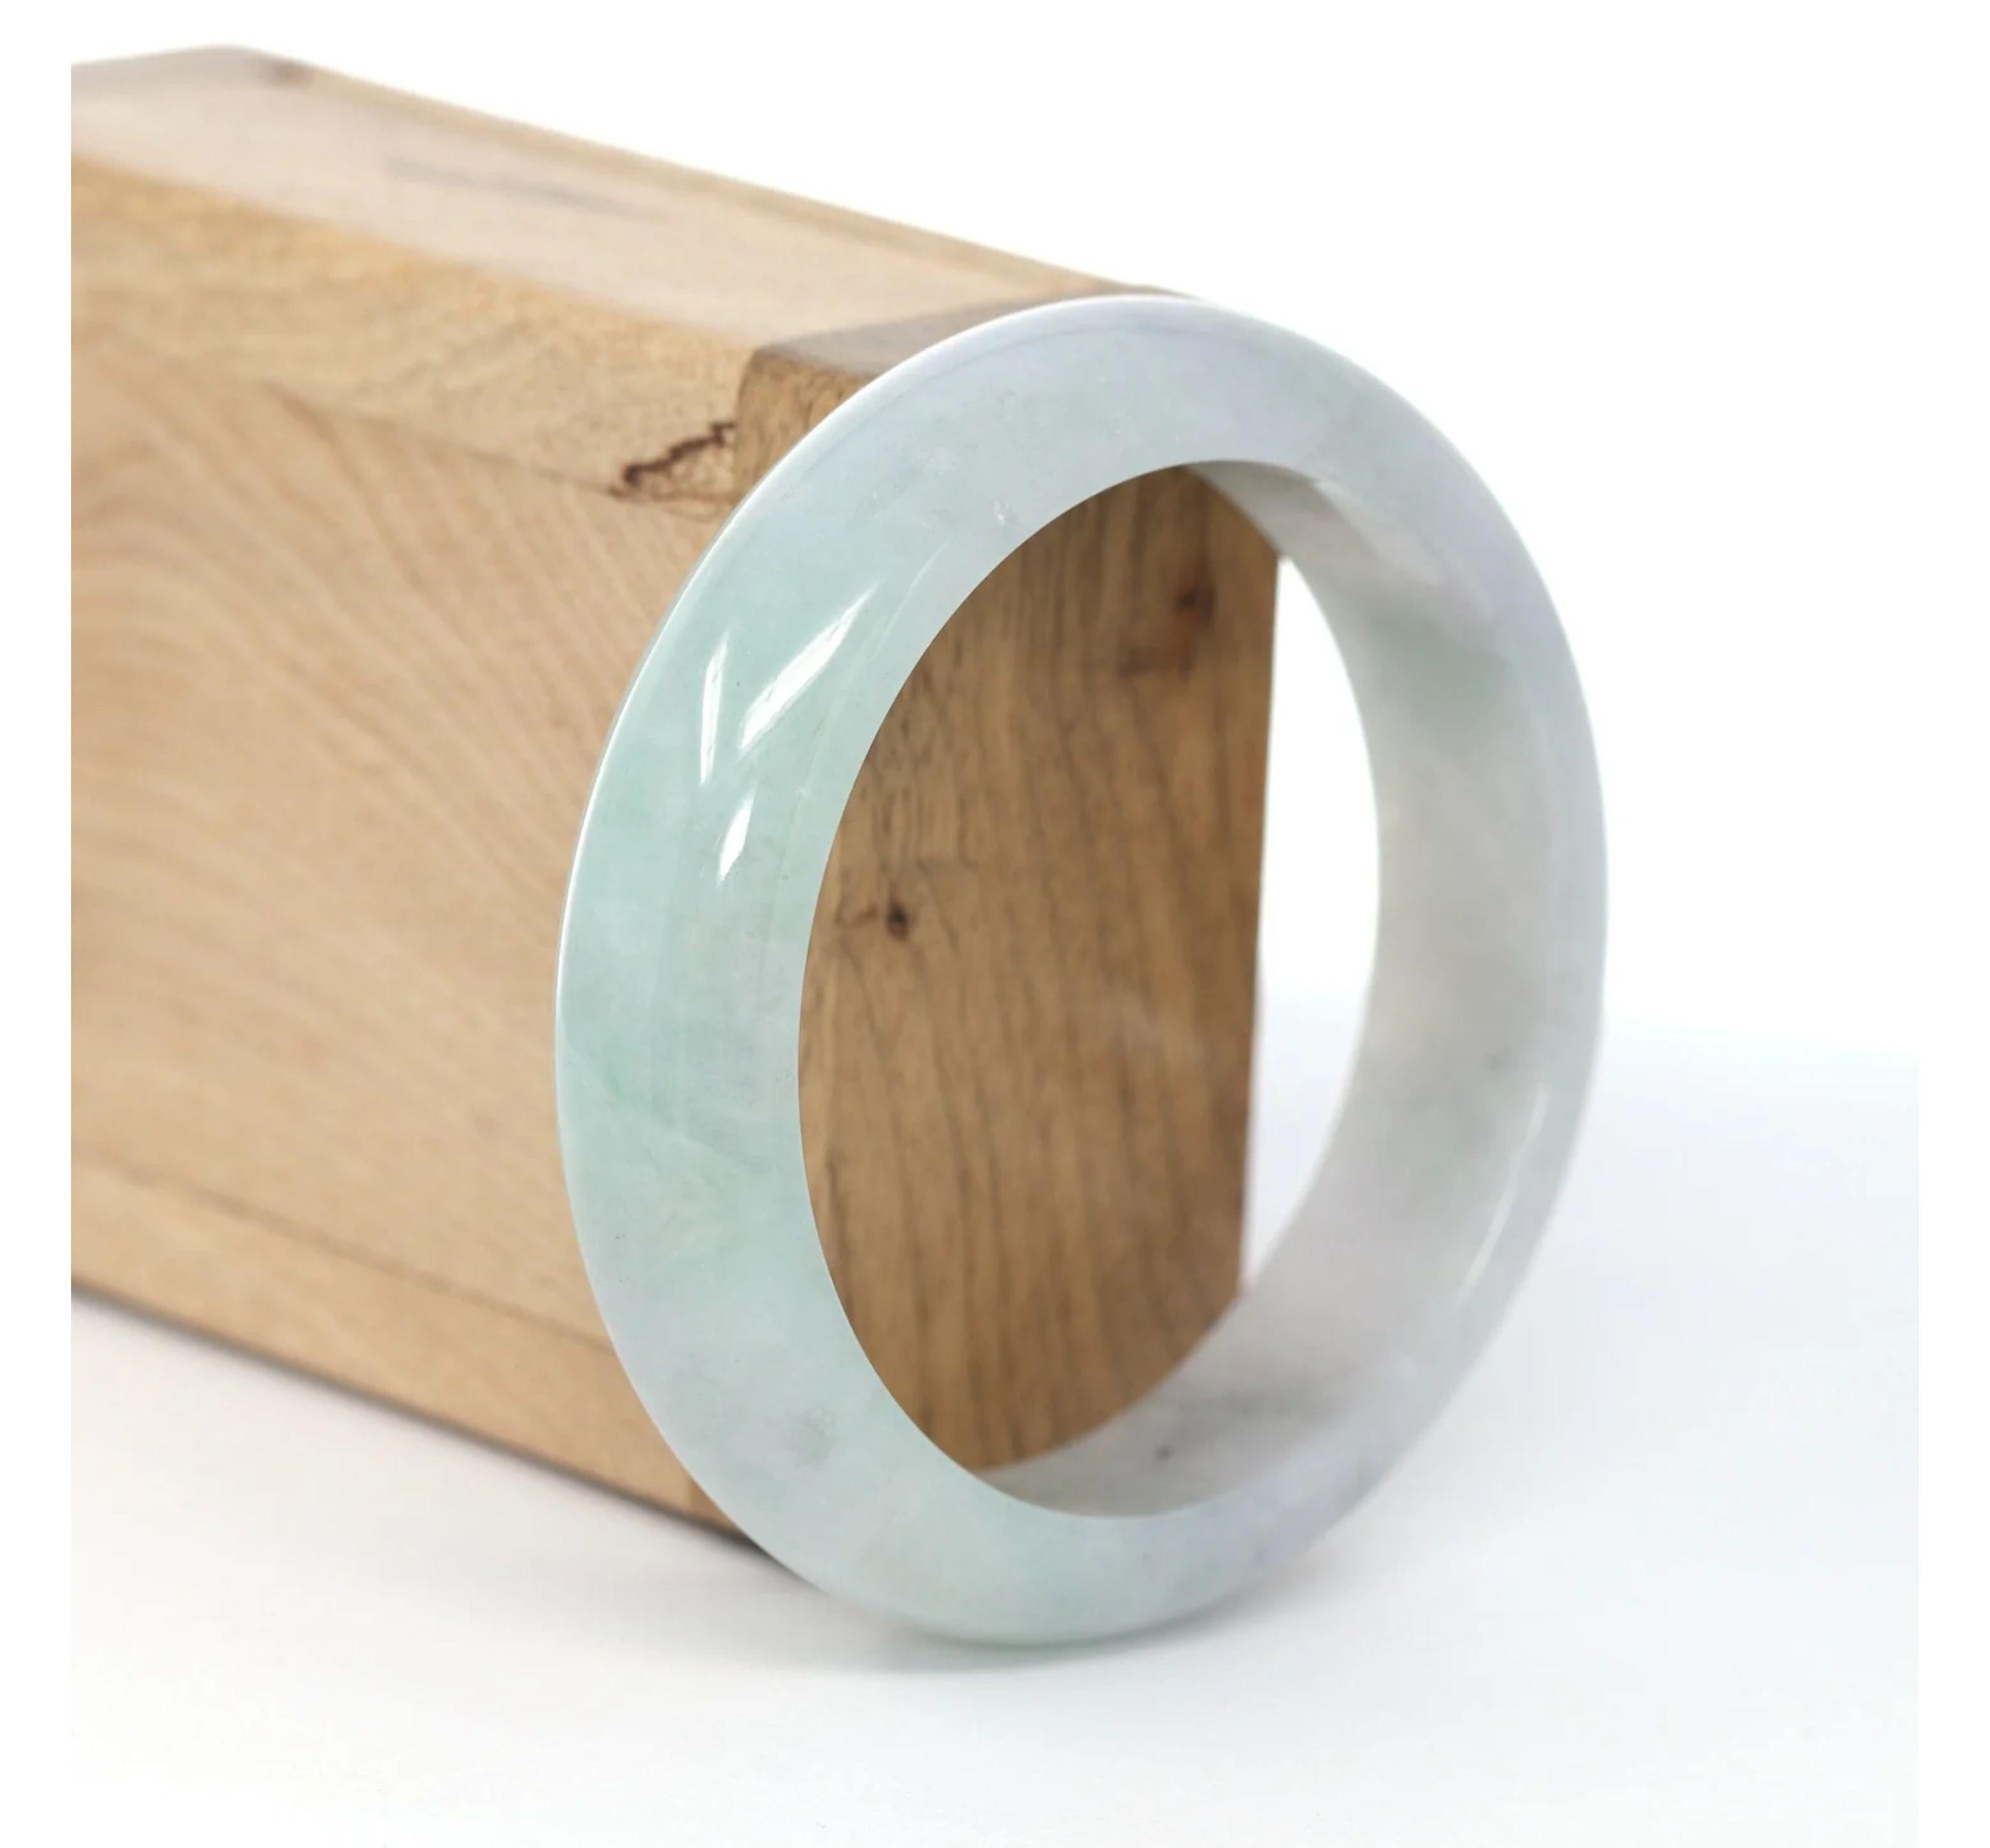 * DETAILS--- This bangle is made with ice light lavender green Burmese jadeite jade. The texture is very smooth and clean even throughout the bangle, very beautifully translucent. This bangle is characterized by beautiful lavender patches. and it's